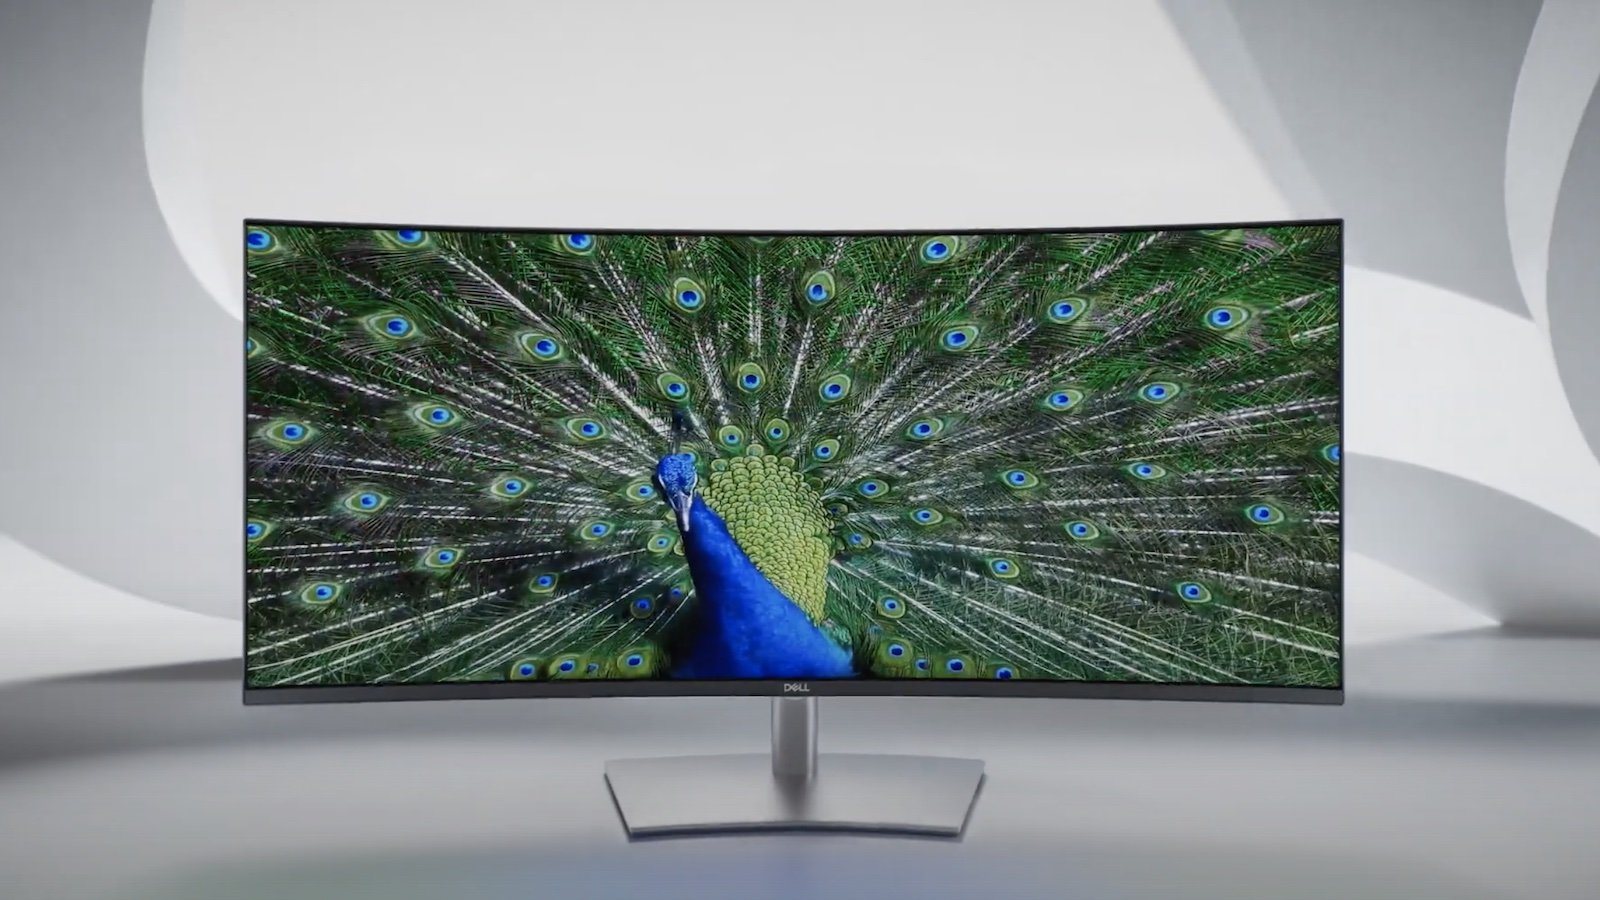 Dell UltraSharp 40 Curved Monitor has a wide resolution of 5,120 x 2,160